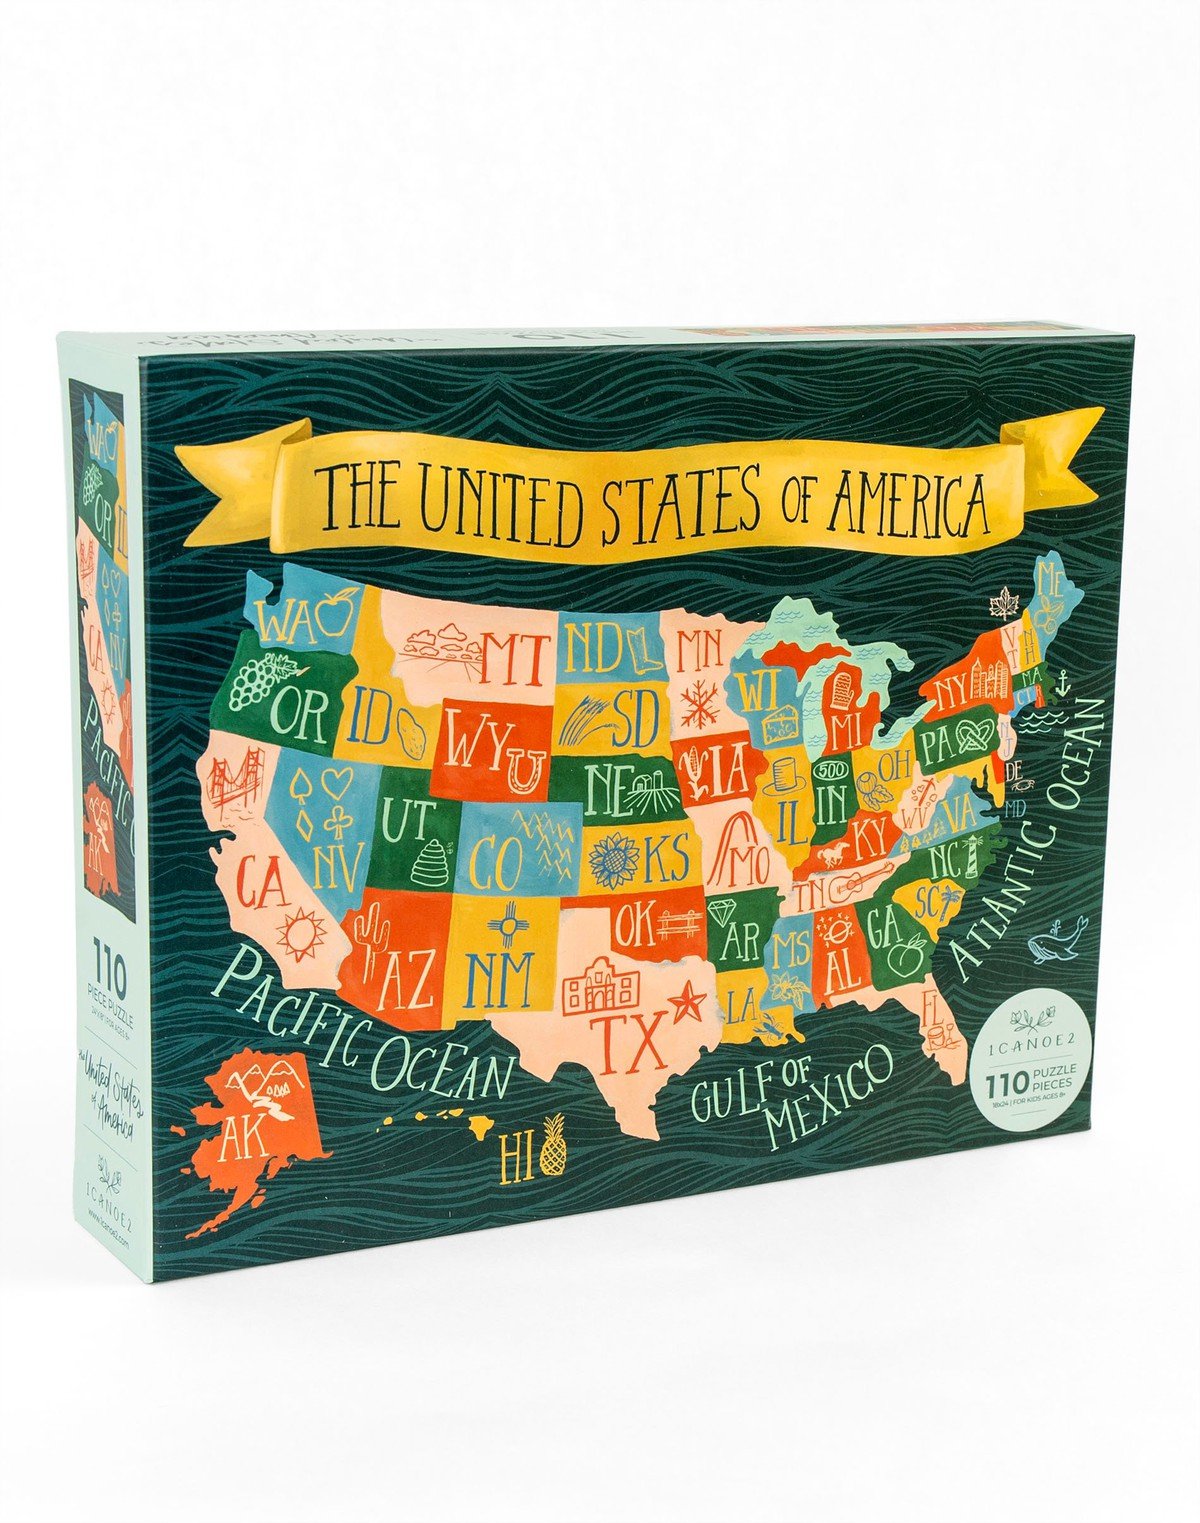 The United States of America - 110 Piece Educational Kids Jigsaw Puzzle item